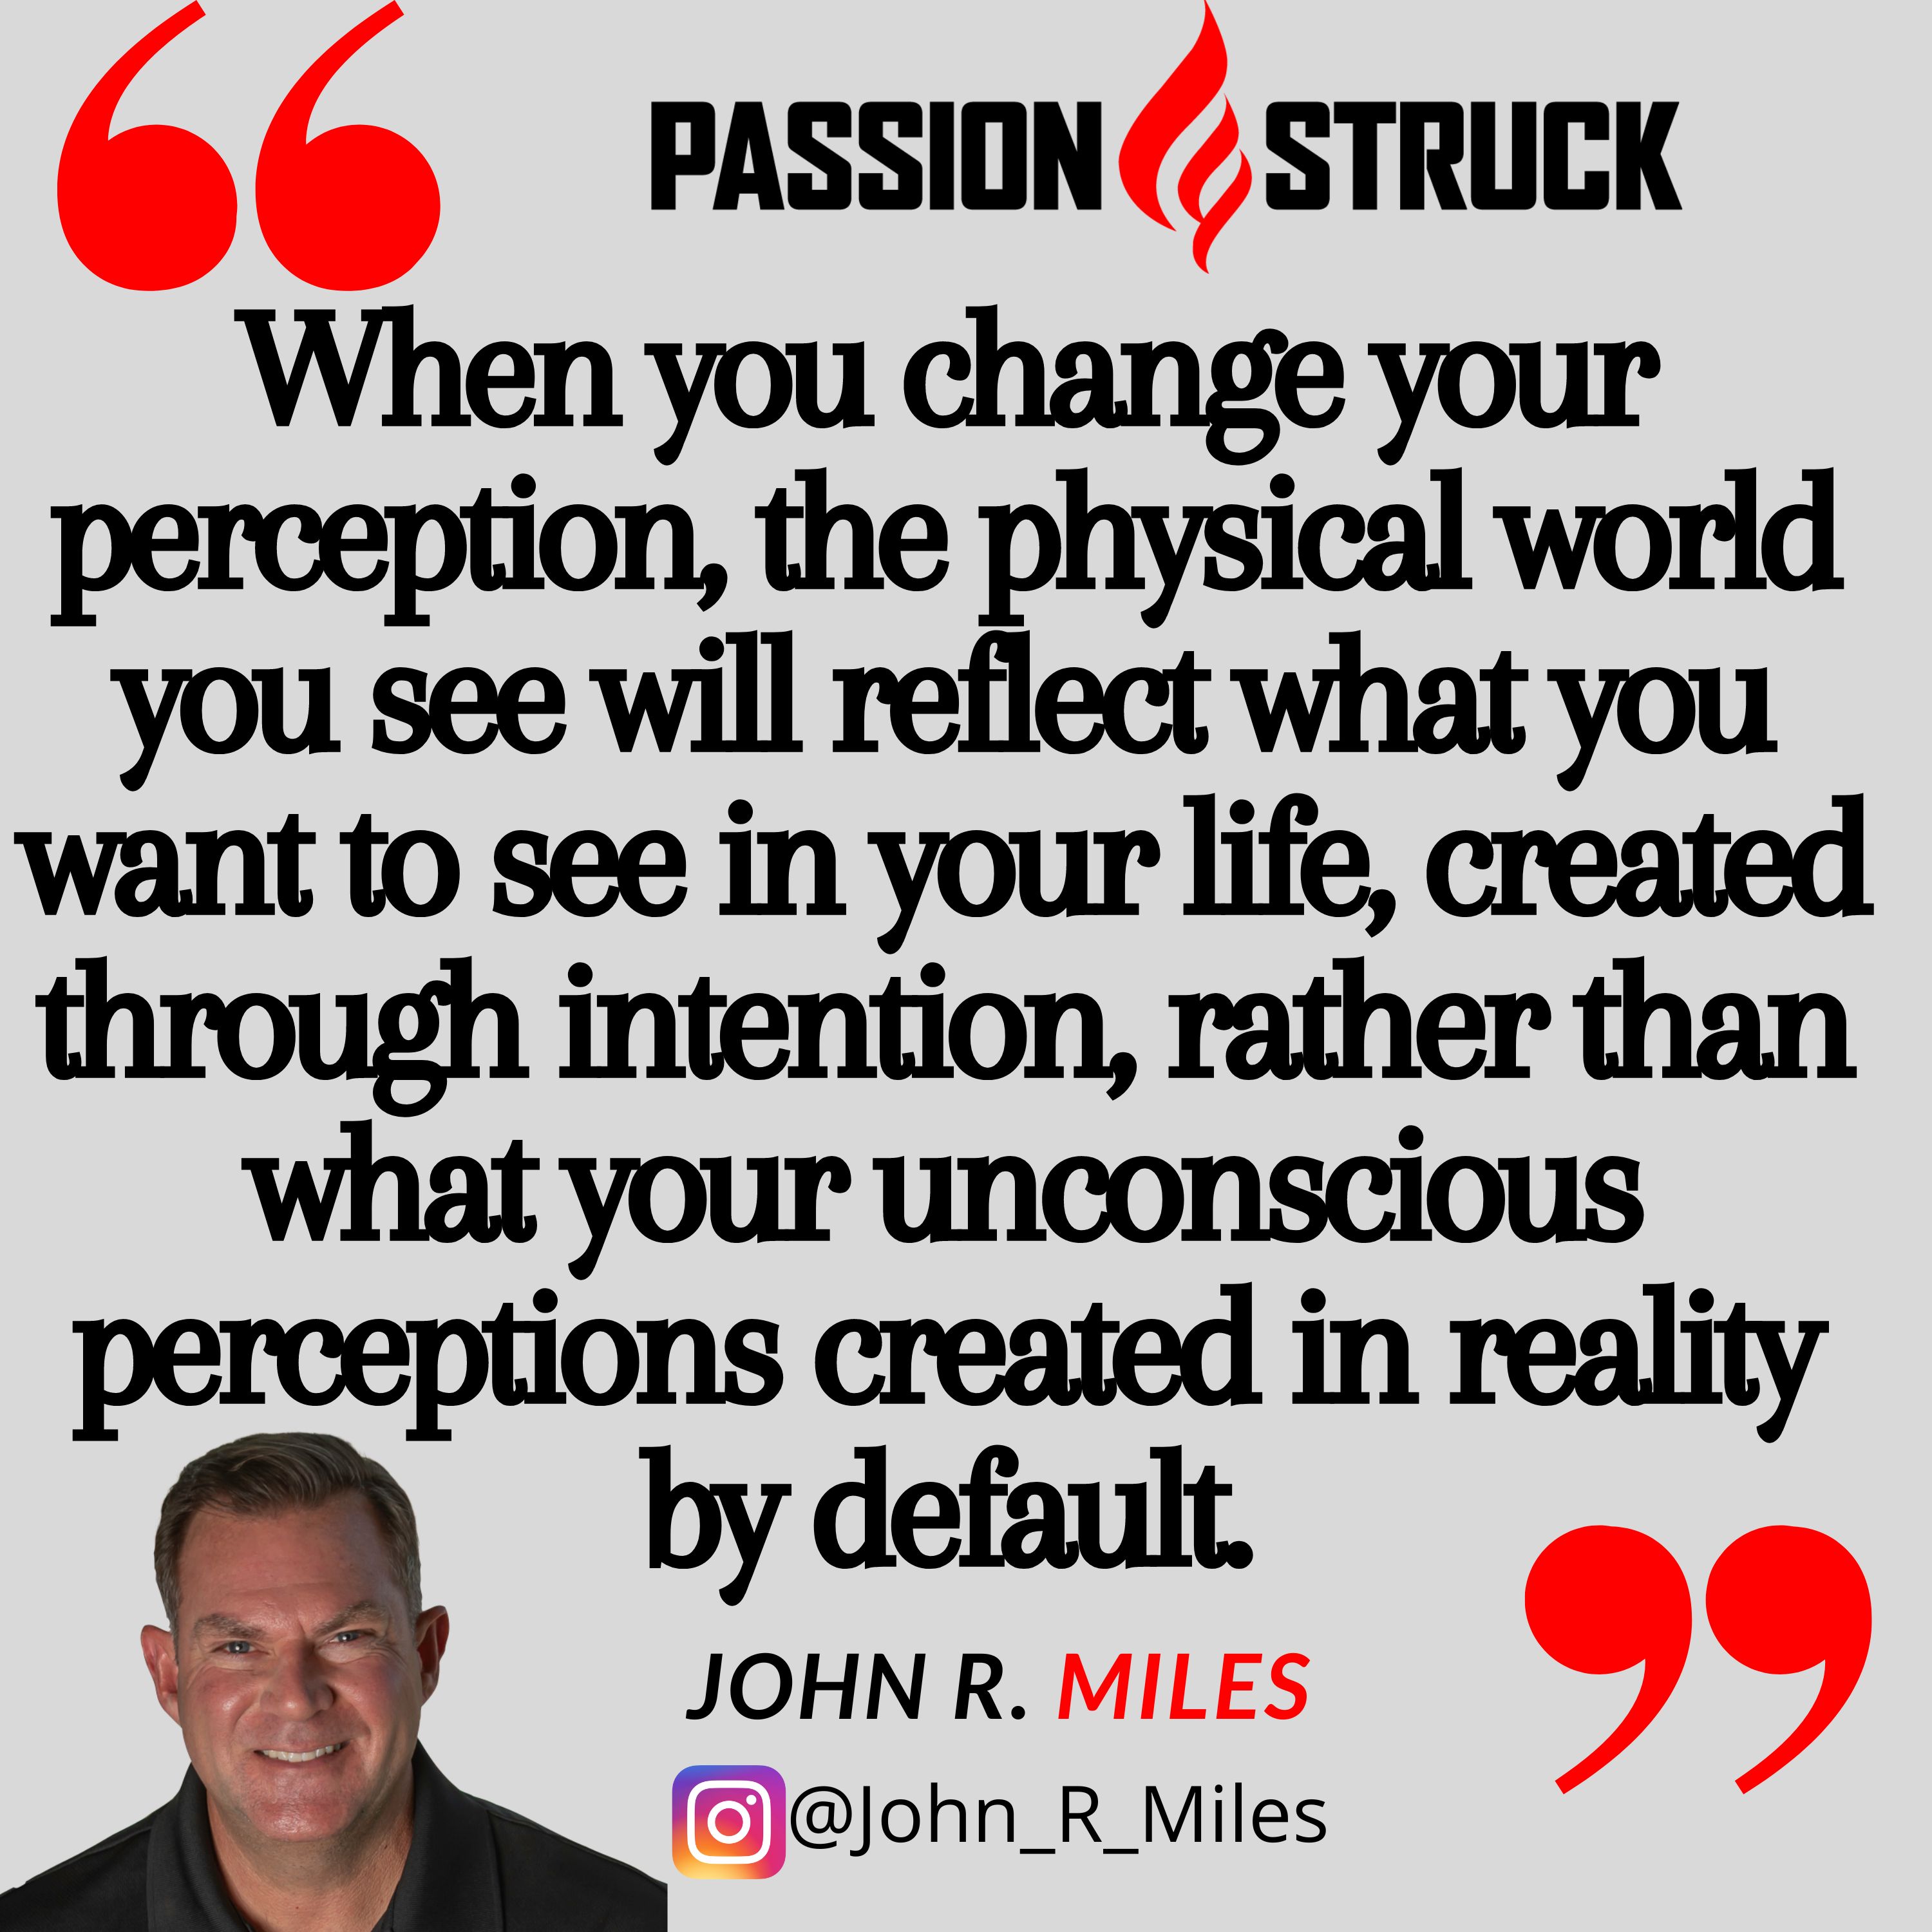 Quote by John R. Miles on the Passion Struck podcast: "When you change your perception, the physical world you see will reflect what you want to see in your life, created through intention, rather than what your unconscious perceptions created in reality by default."